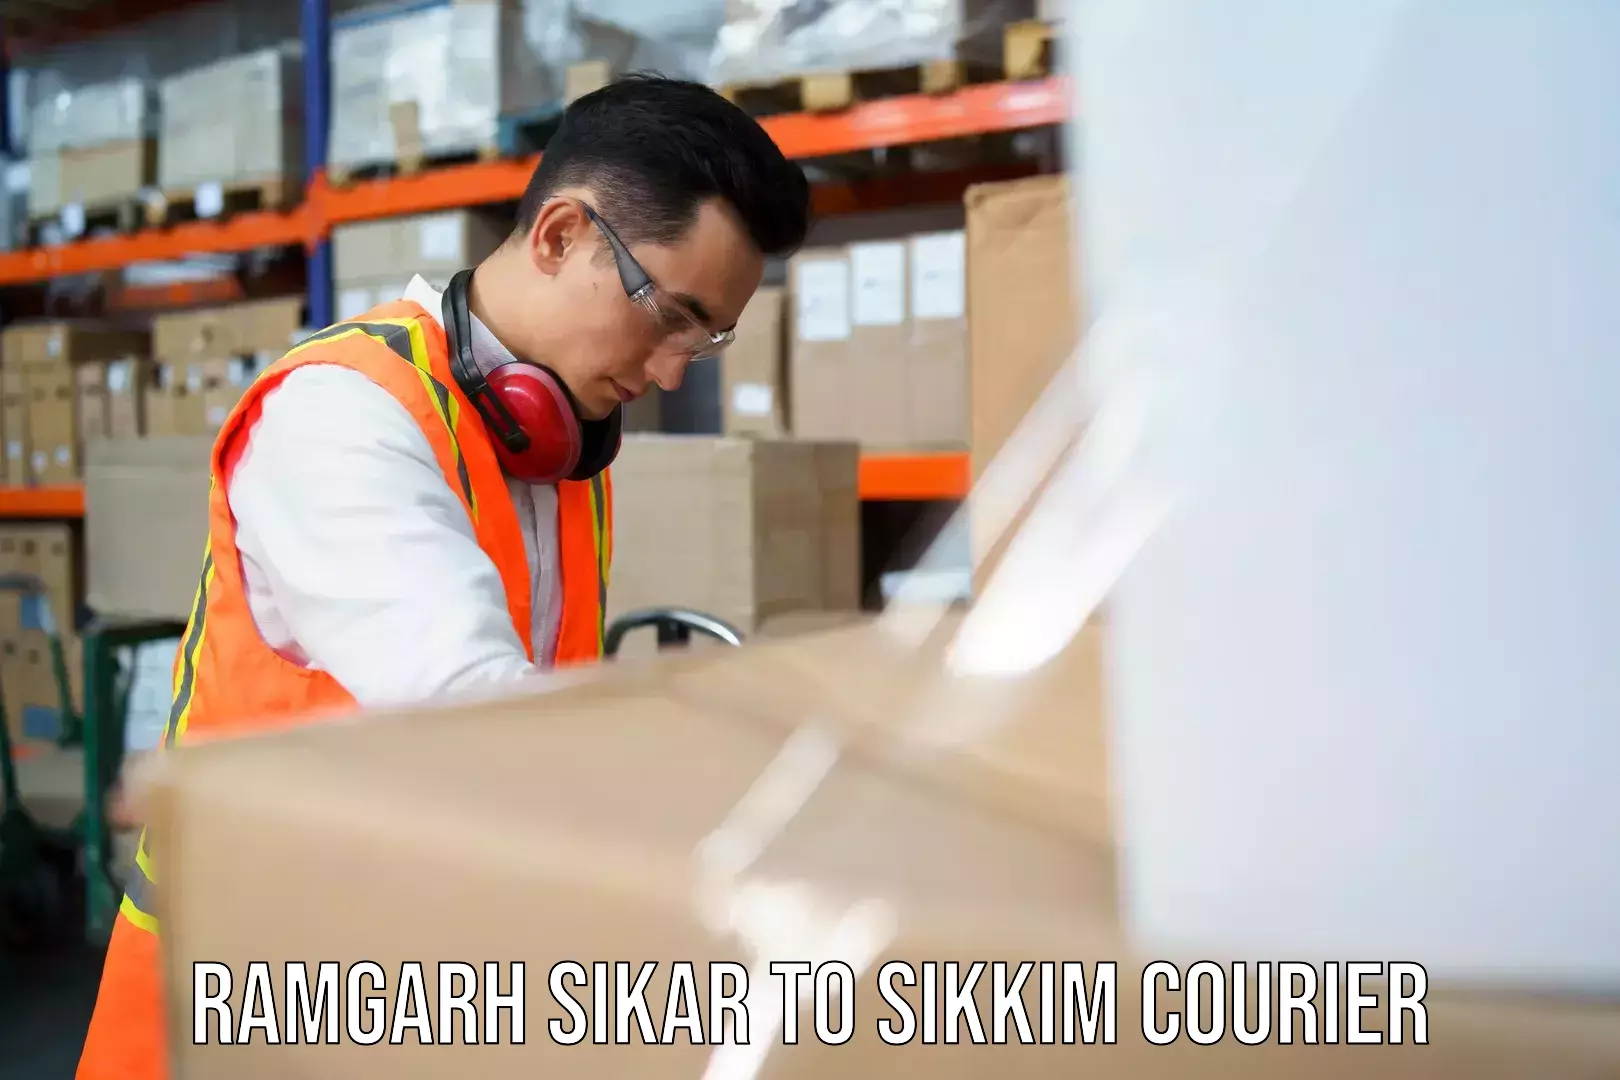 Automated parcel services Ramgarh Sikar to North Sikkim